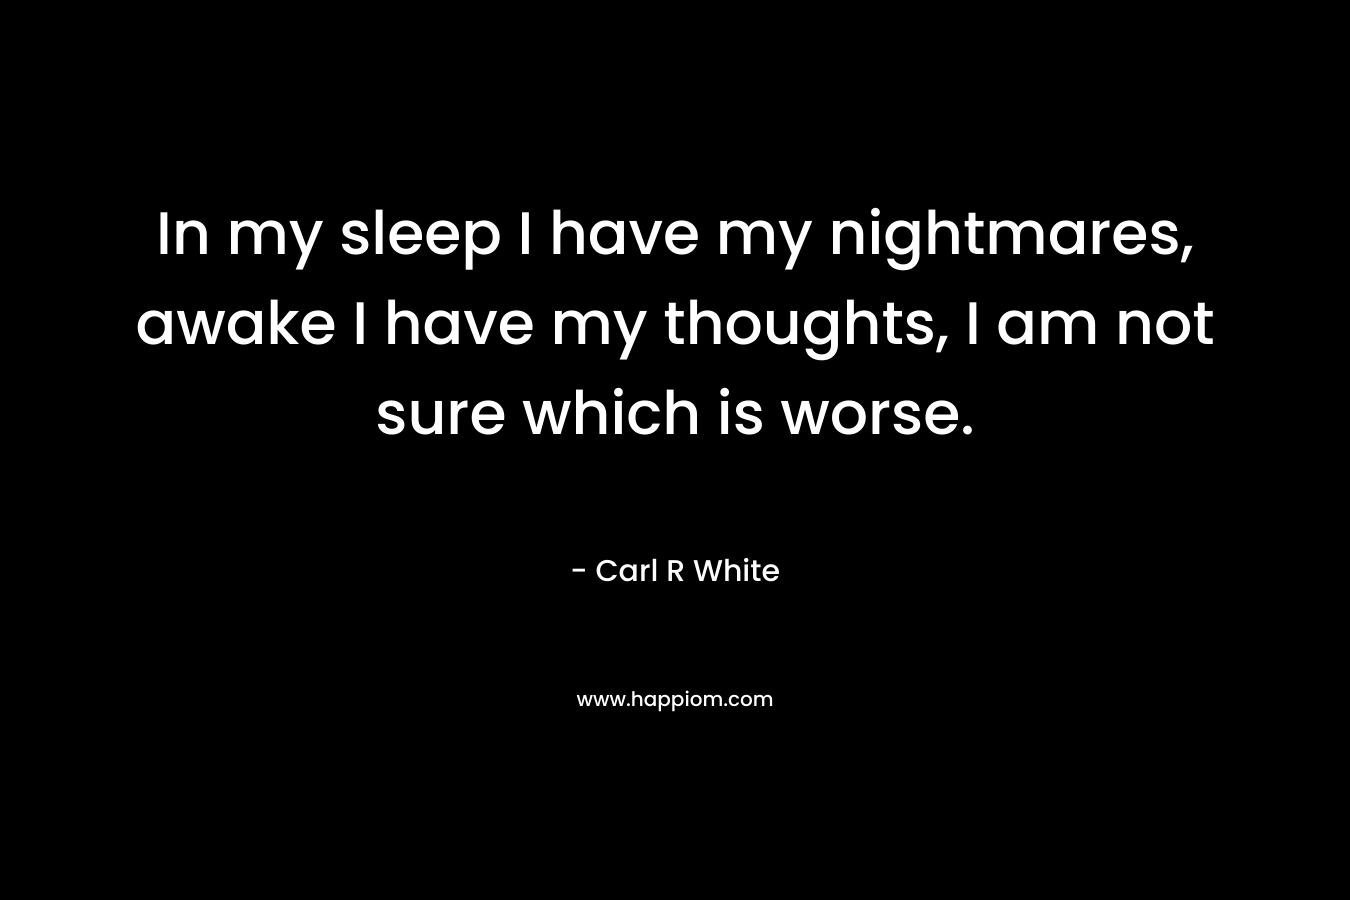 In my sleep I have my nightmares, awake I have my thoughts, I am not sure which is worse. – Carl R White